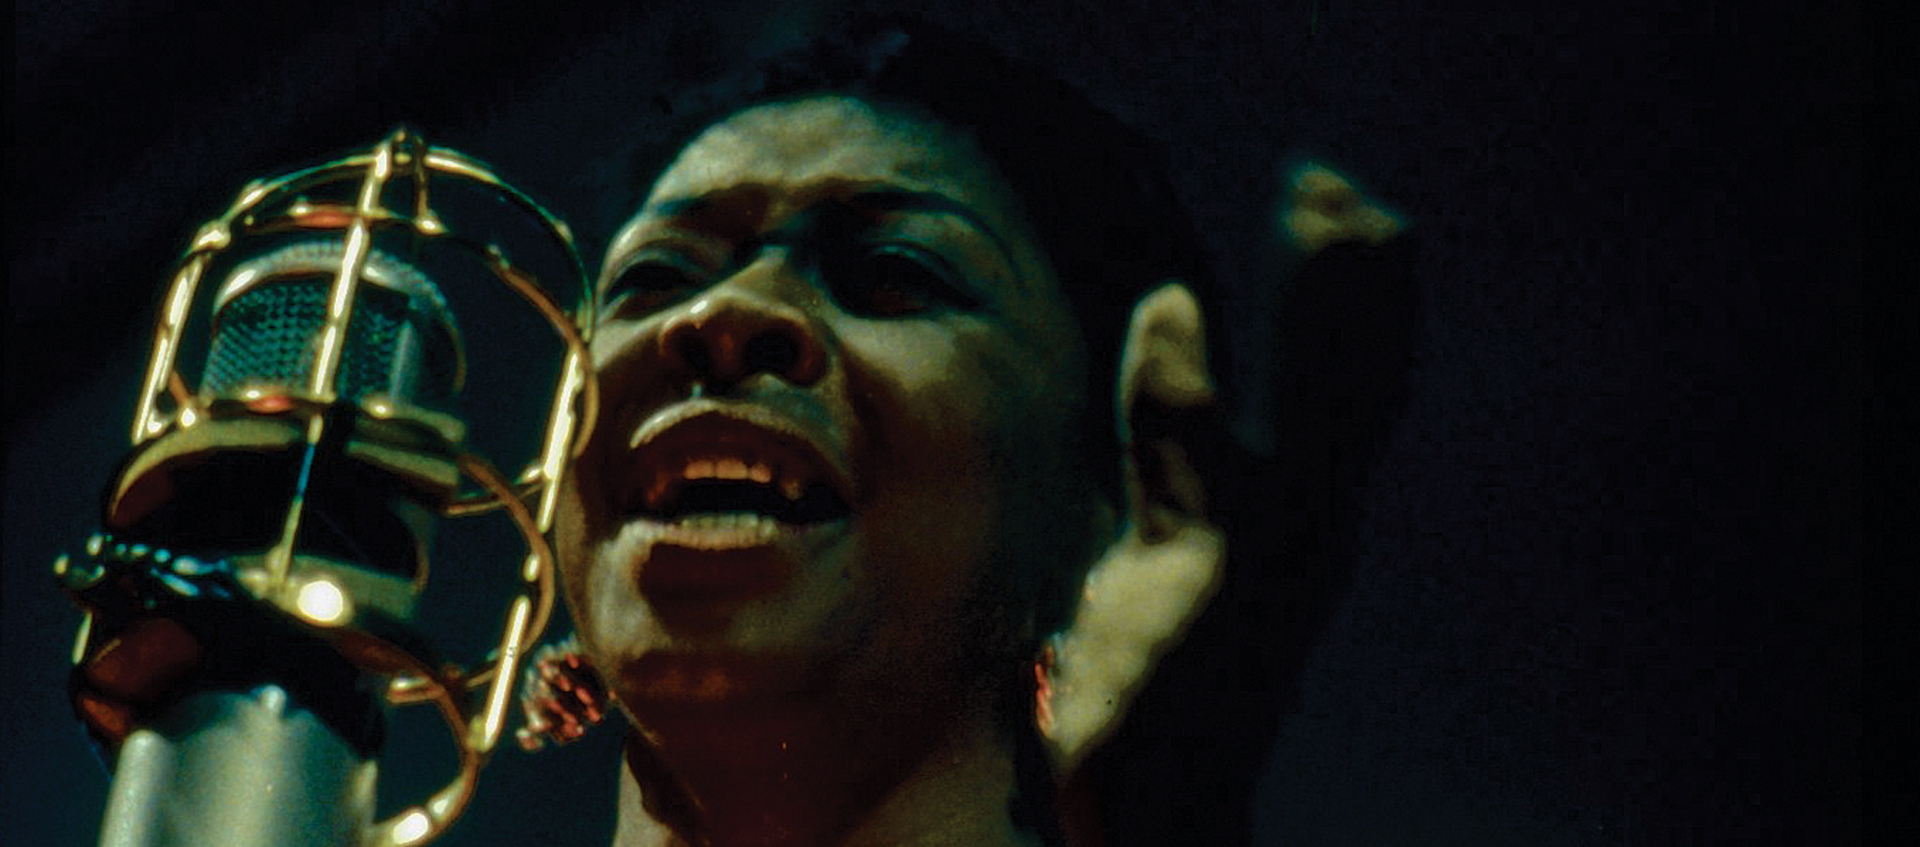 Dinah Washington, seen from neck up, sings into a large bullet microphone in a scene from the documentary Jazz on a Summer's Day